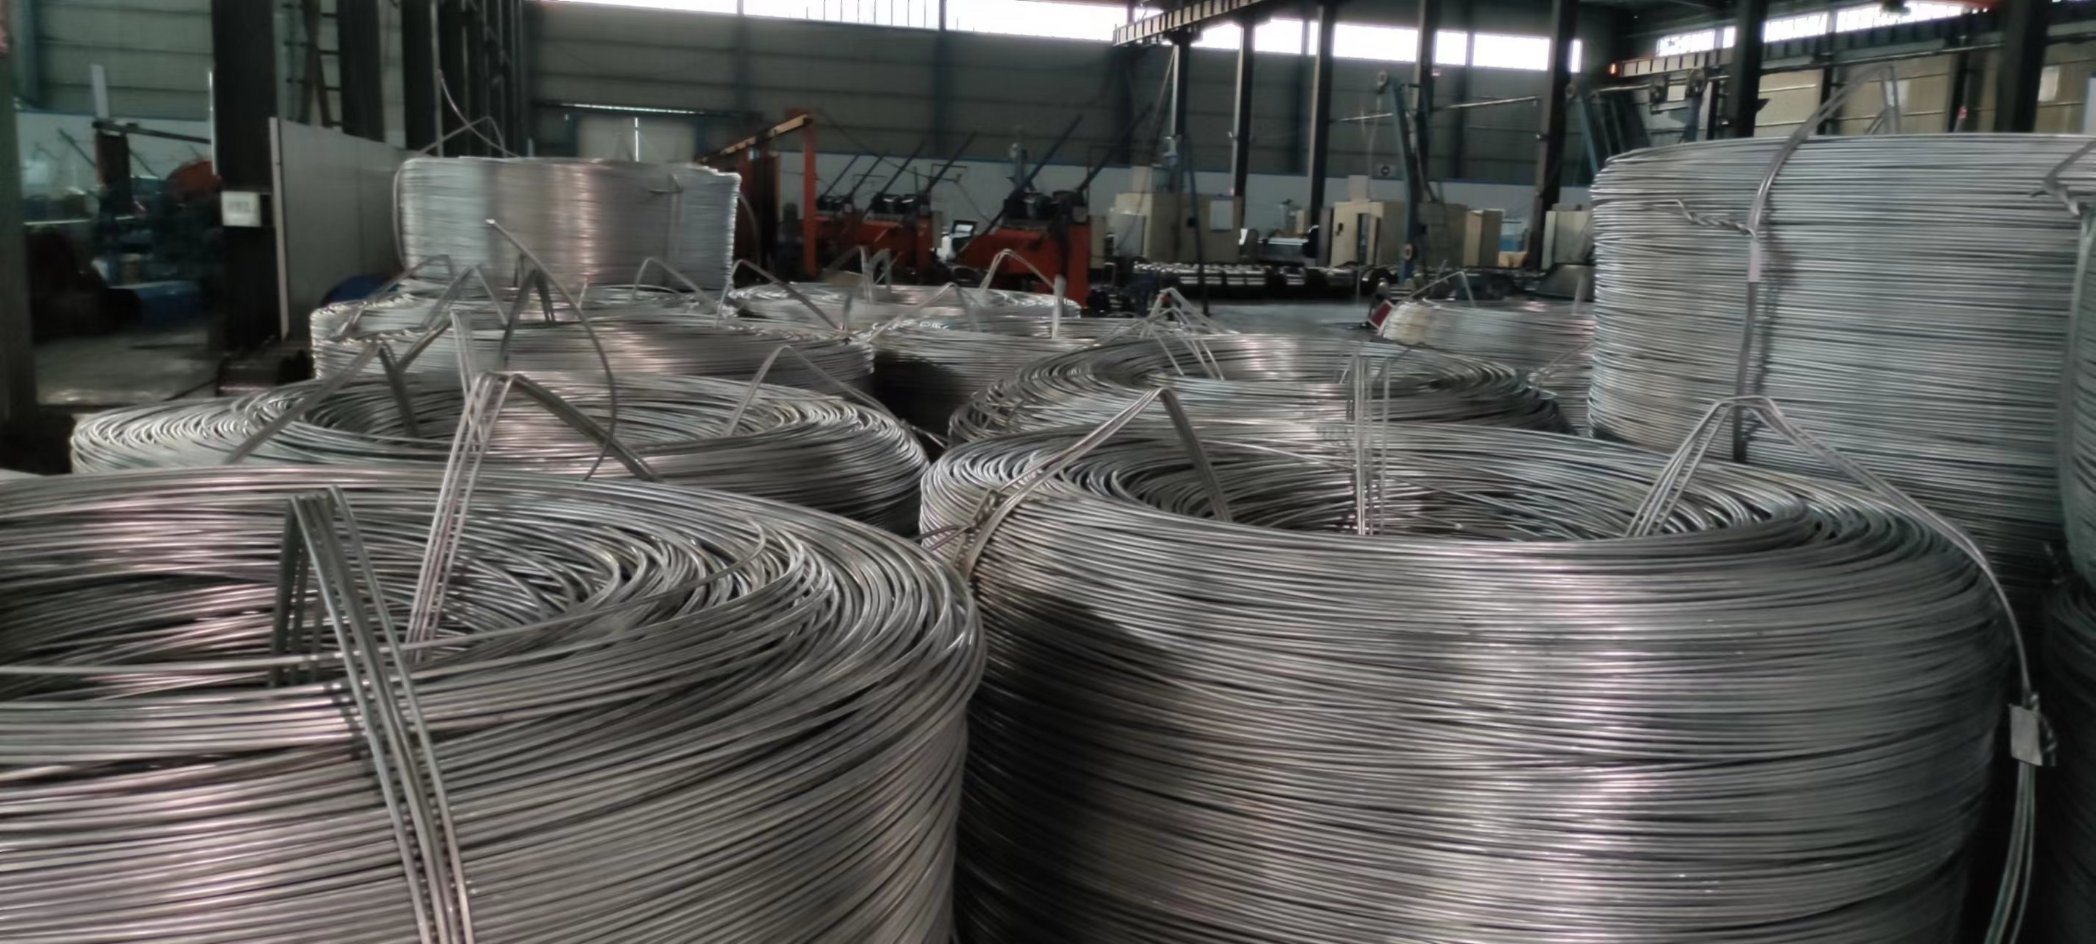 Hot Sale 1350 Aluminium Wire Rod A2/A4/A6/A8 for Cable